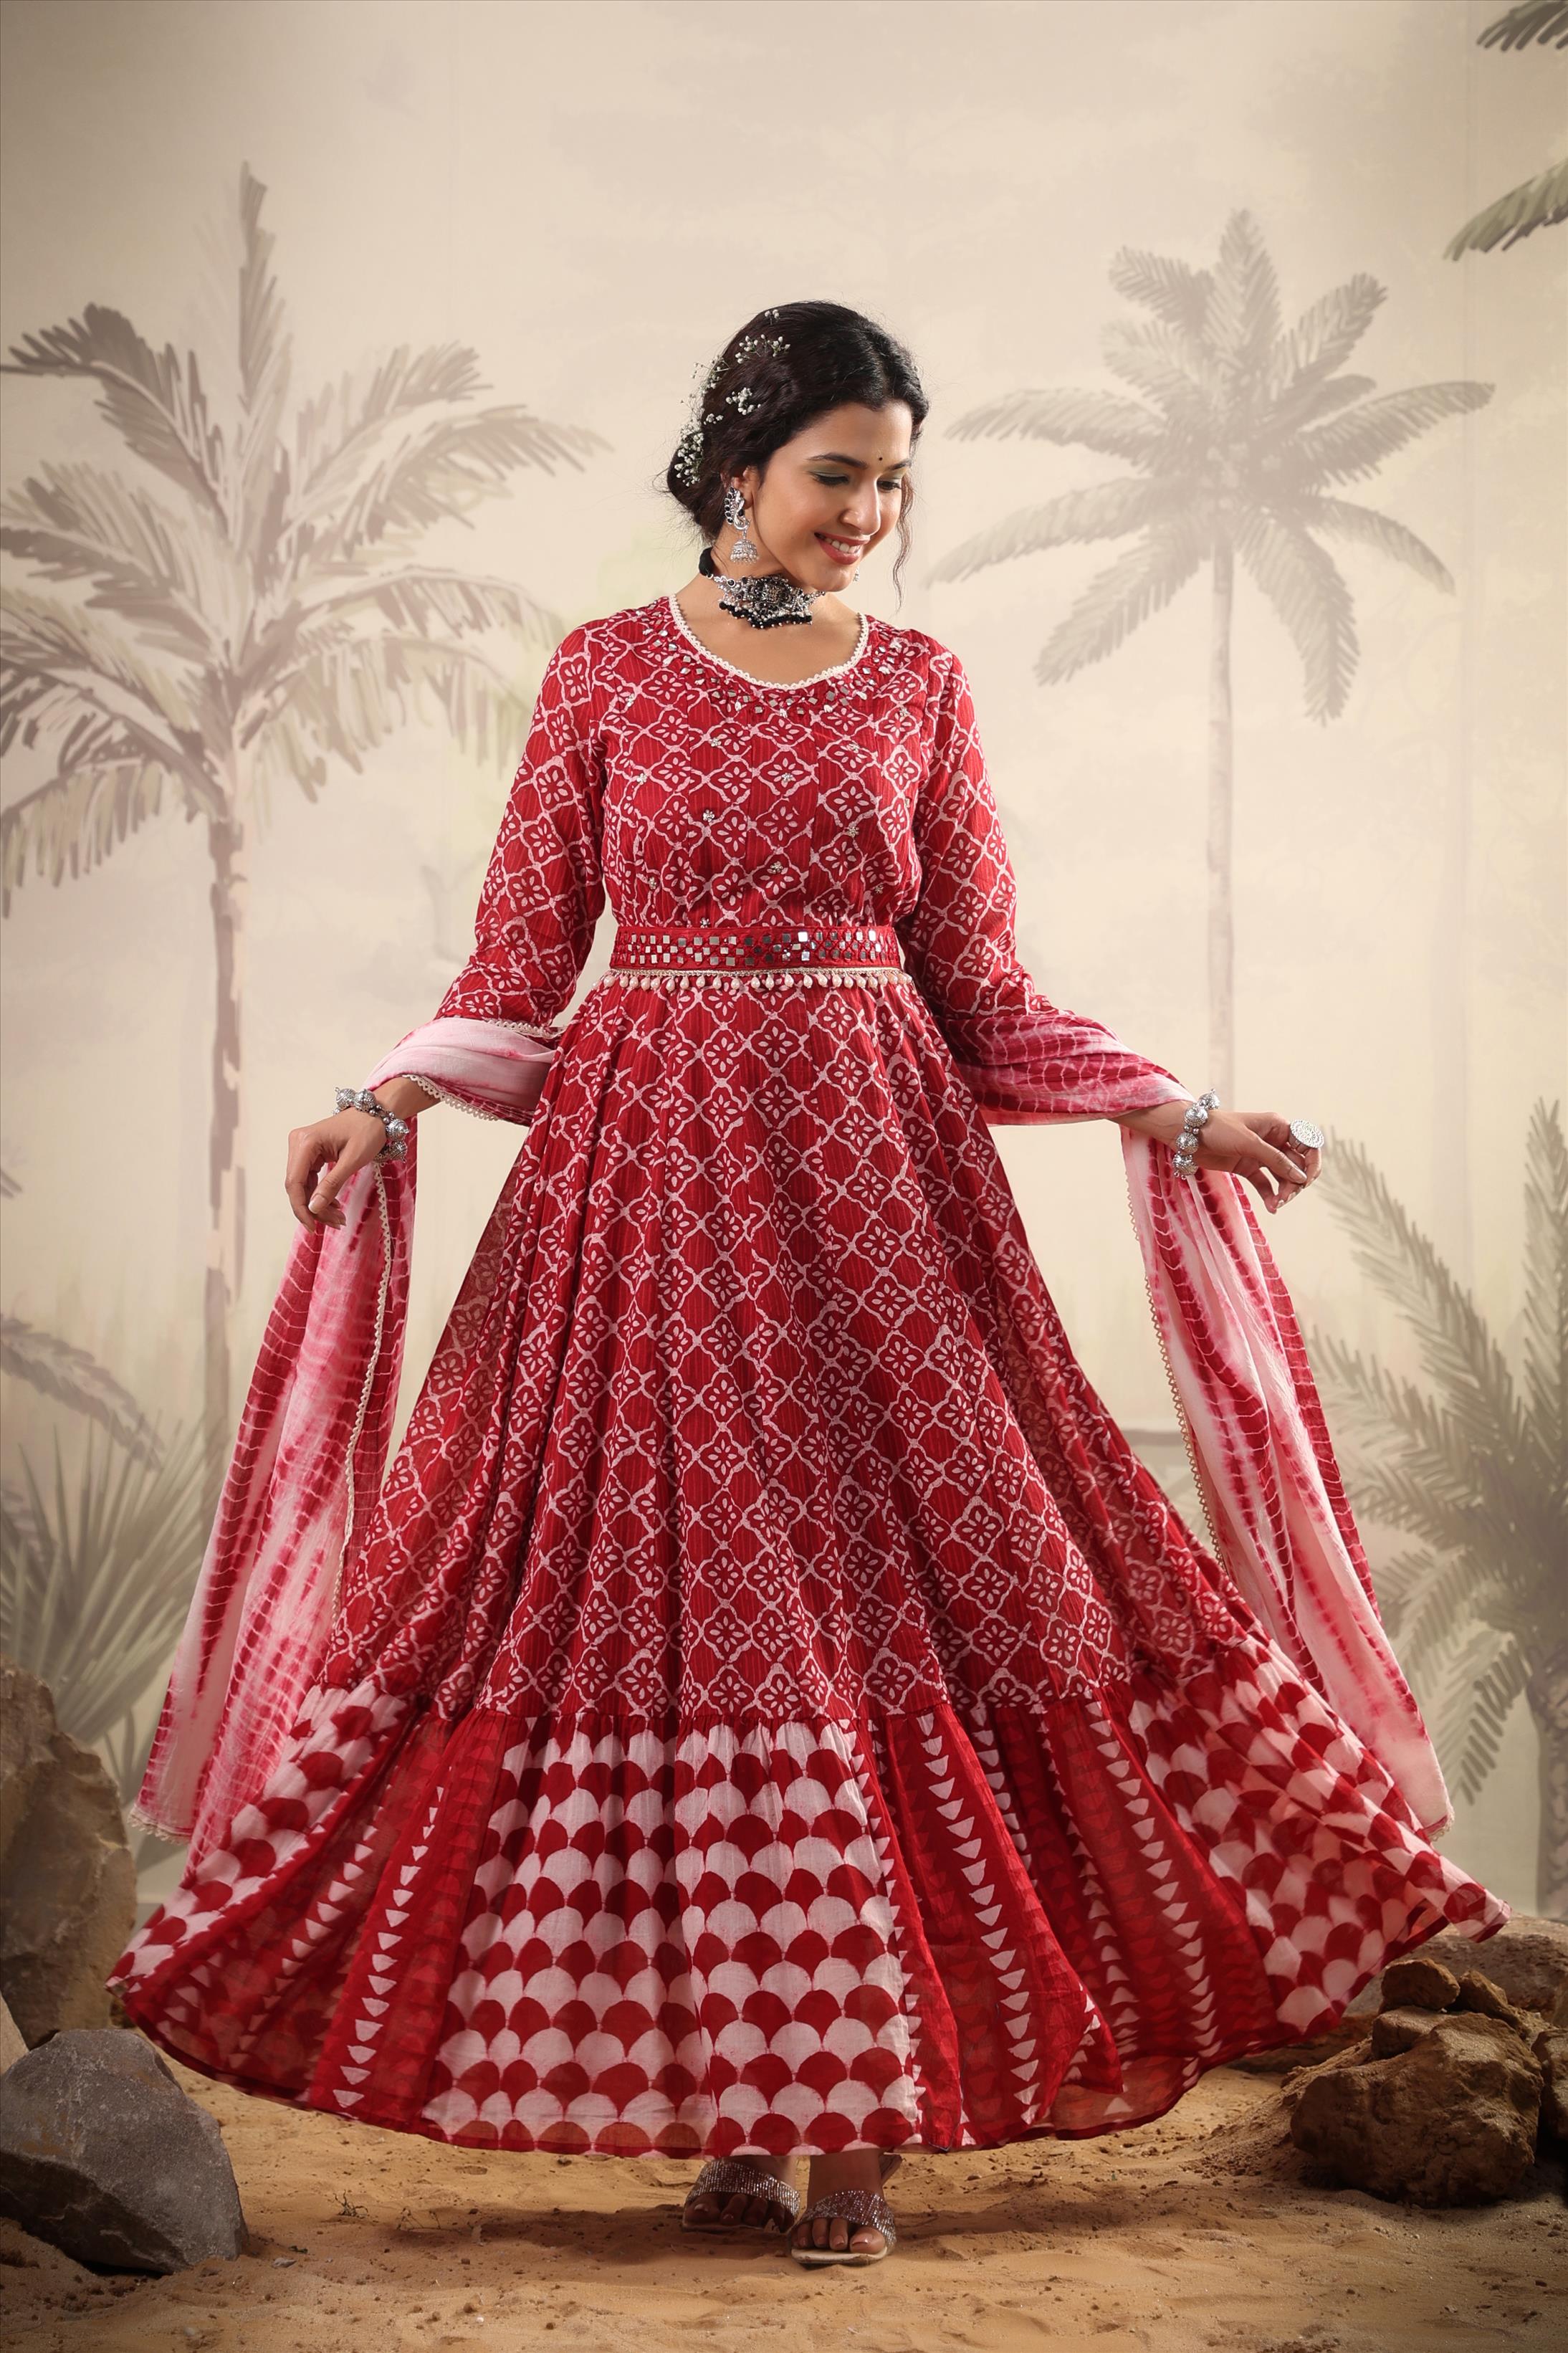 Red Colour Bollywood Style Partywear Beautiful Ethnic Dress - KSM PRINTS -  4194462